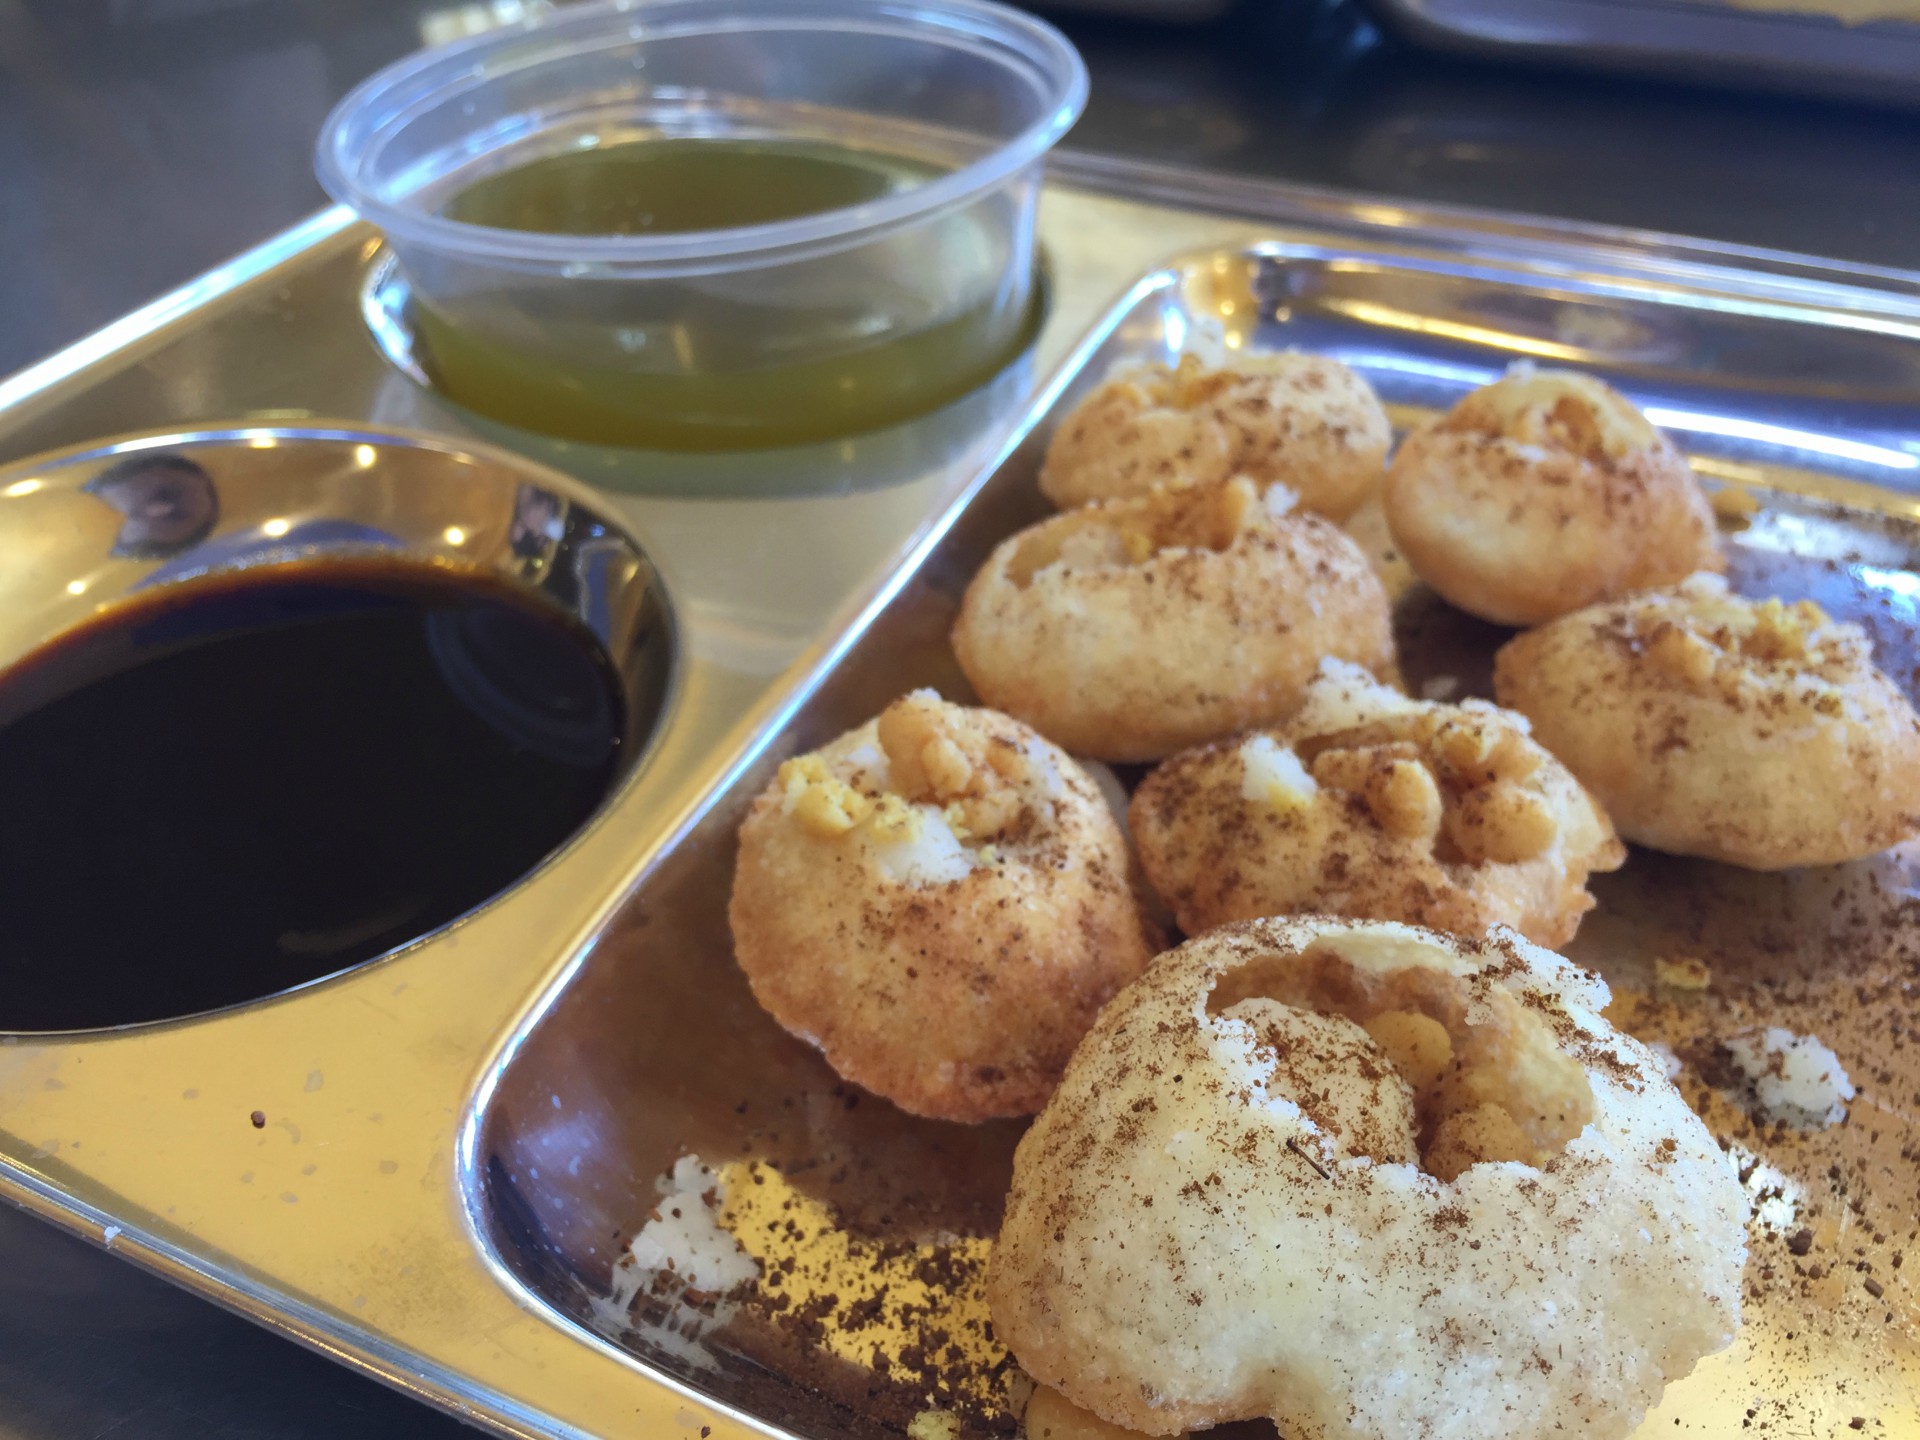 Crispy pani puri is just one of the delicious Indian snack foods Vik's offers.